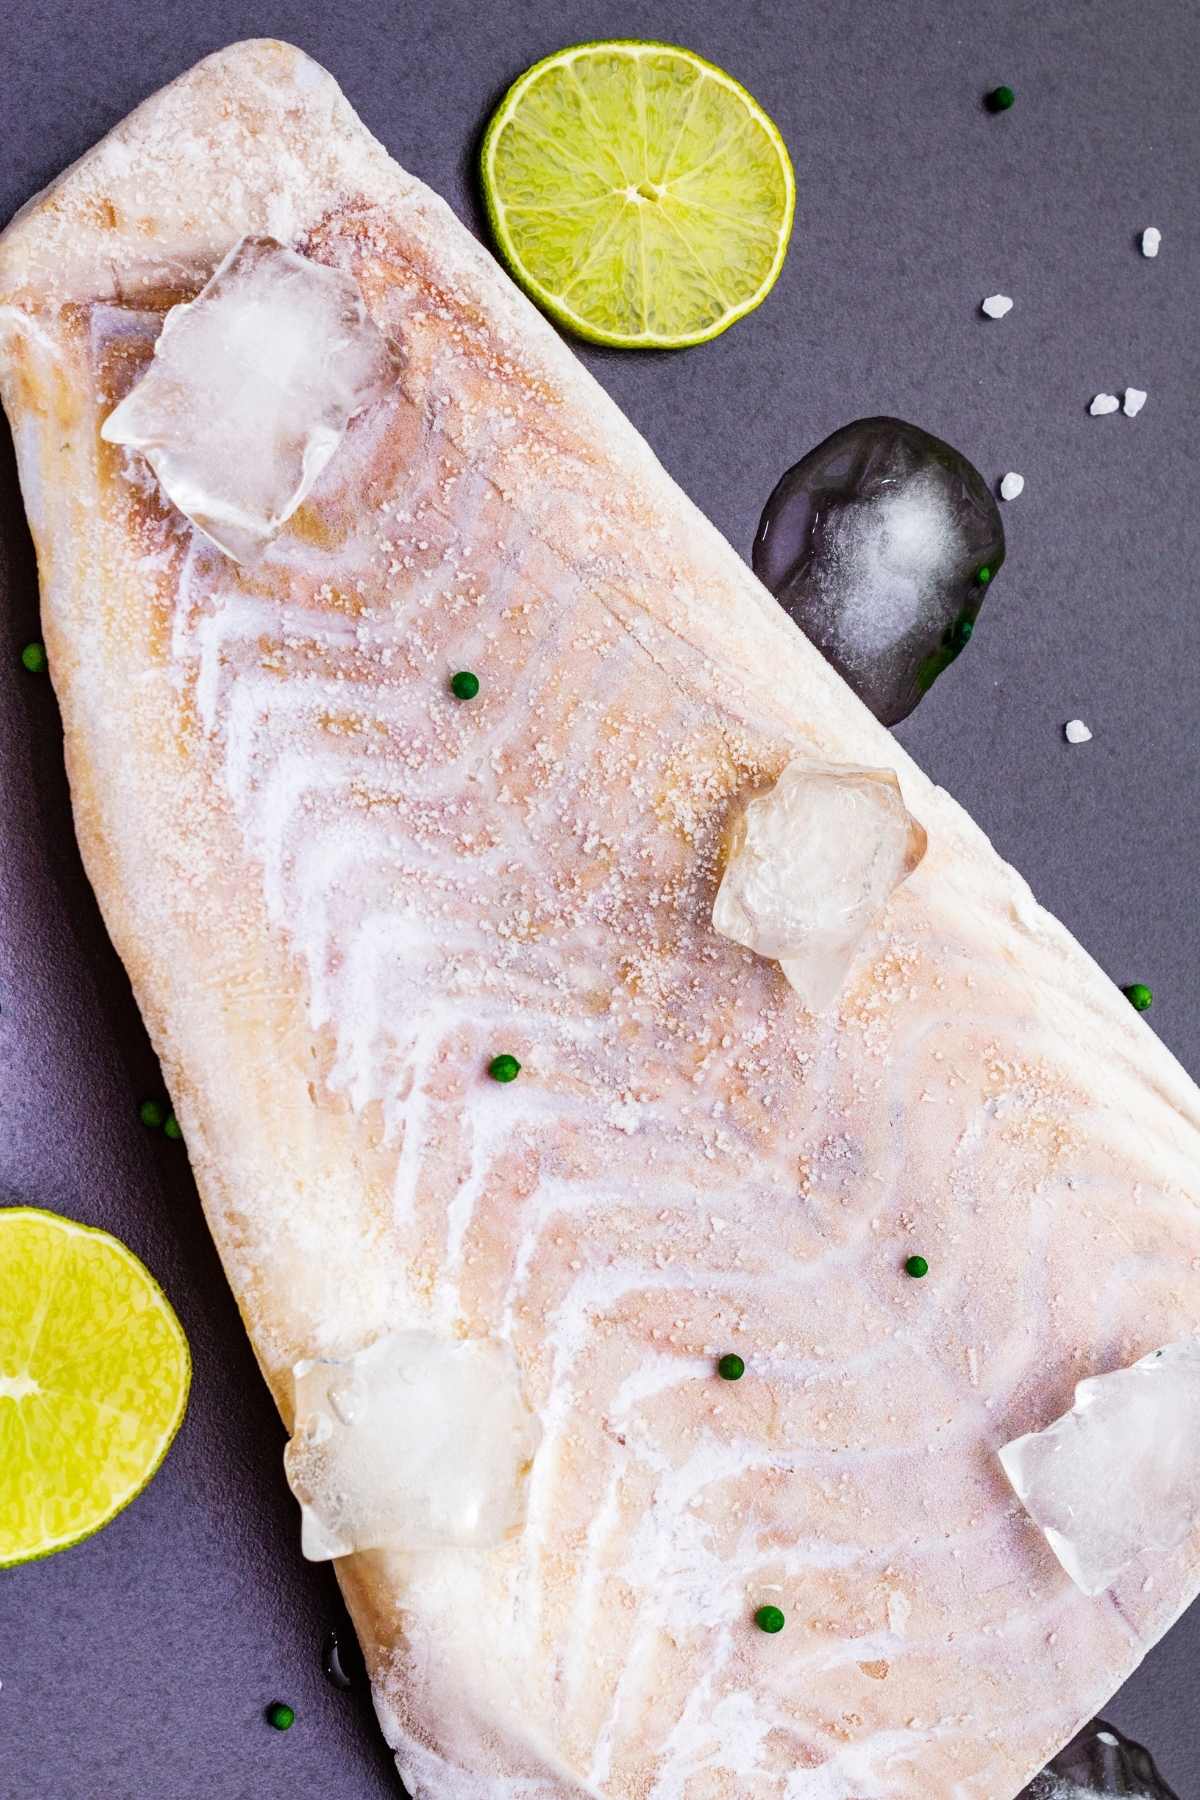 Pollock is a mild-flavored white fish that can be enjoyed in many dishes. It takes just minutes to prepare, and is easy to pan-fry, bake, or grill. It is also high in protein and low in fat.